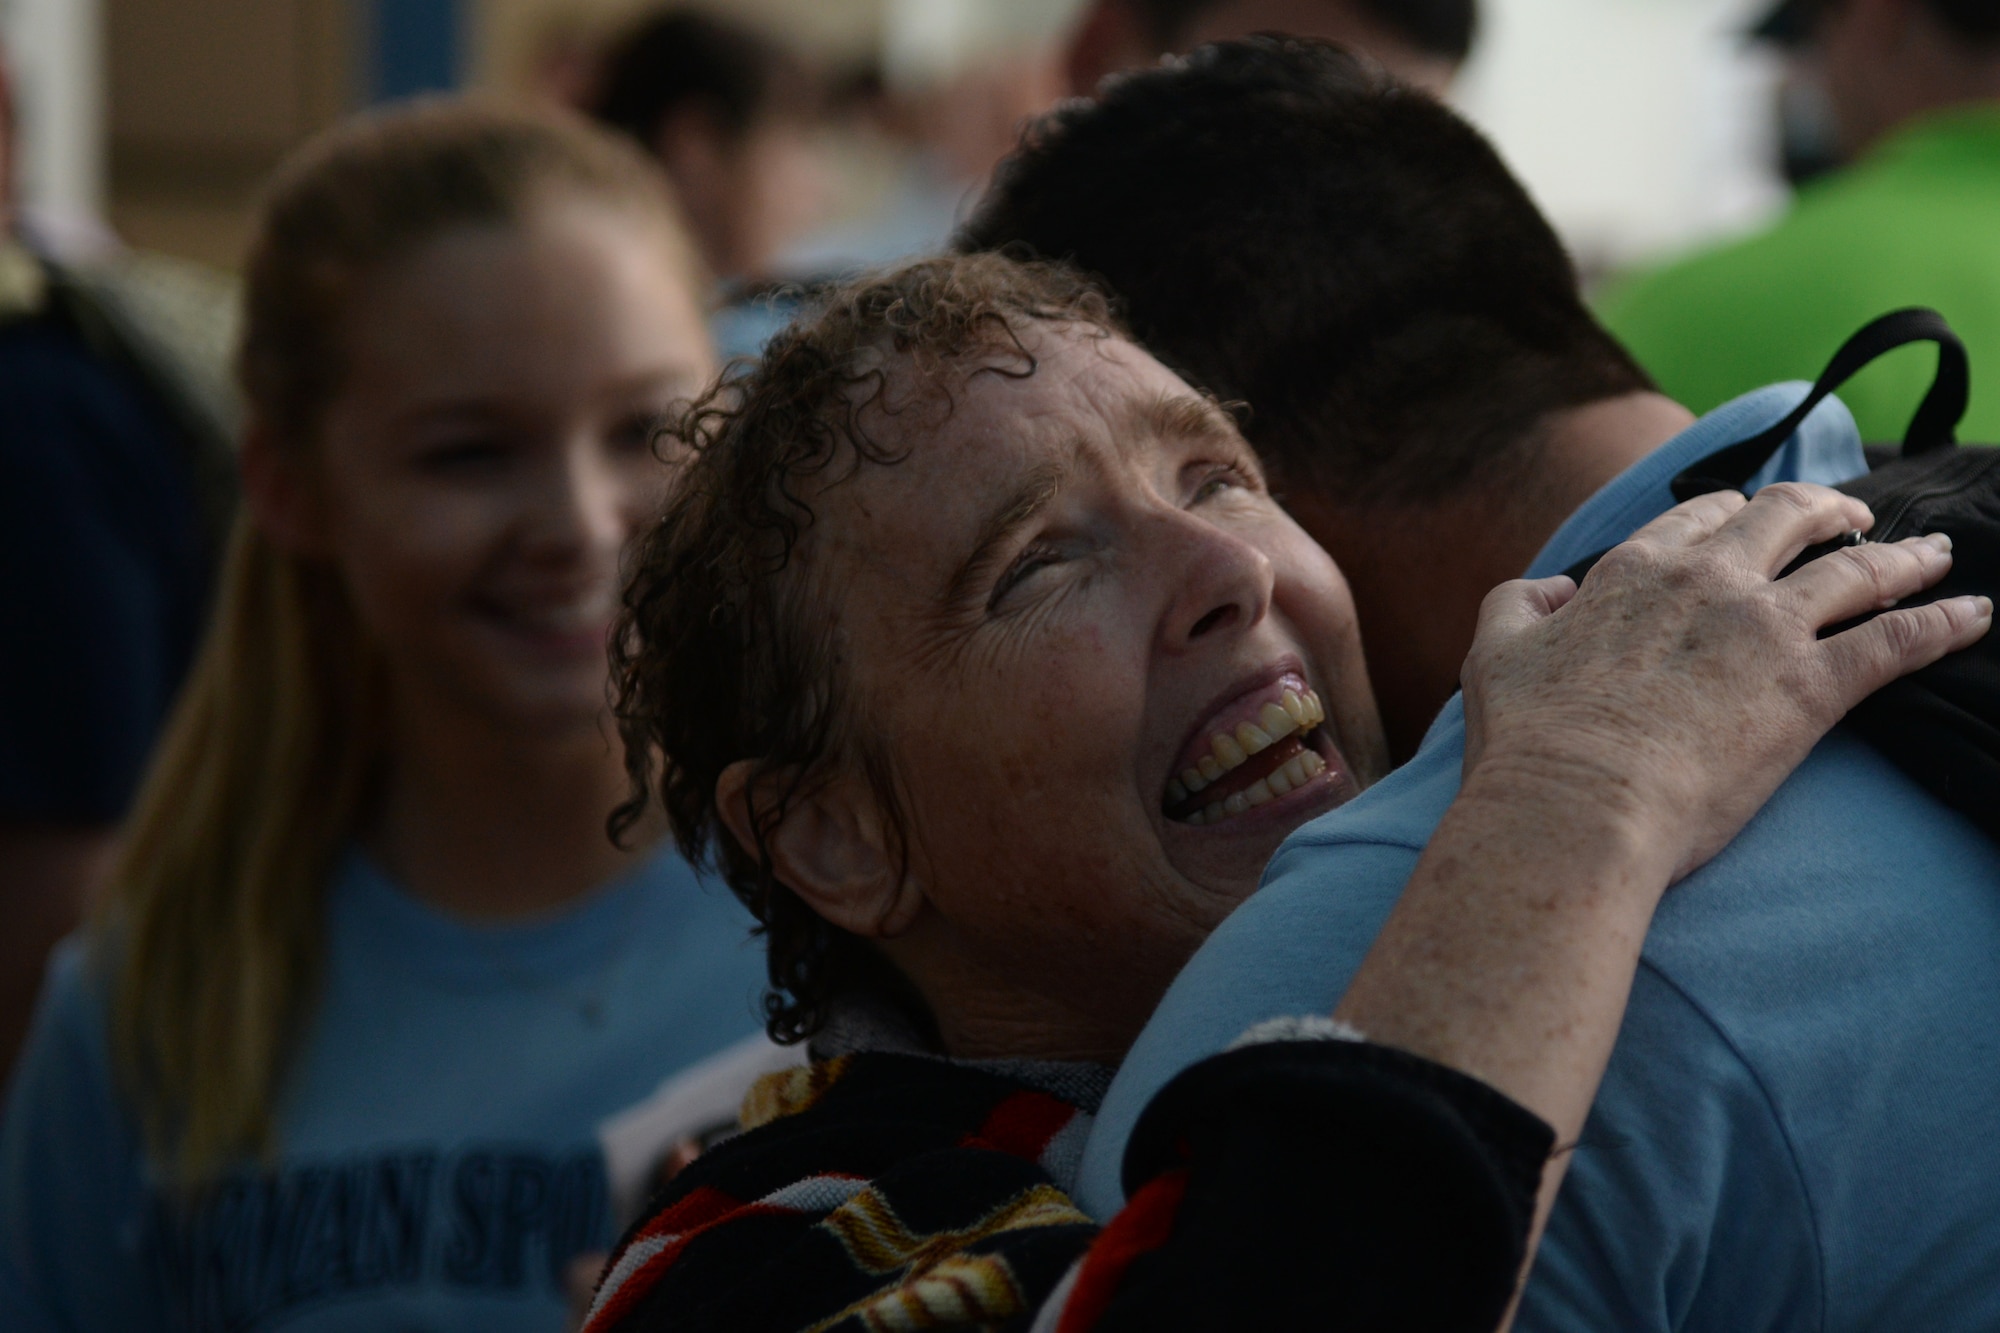 Paula Carpenter, District 5 Special Olympics Mississippi athlete, hugs Senior Airman Hashim Mefleh, 336th Training Squadron student, after finishing the 50 meter backstroke at the Biloxi Natatorium May 21, 2016, Biloxi, Miss. Mefleh, one of Carpenter’s Airman sponsors, cheered her on in her three aquatics events and got to know her for the three days of Special Olympics. (U.S. Air Force photo by Airman 1st Class Travis Beihl)